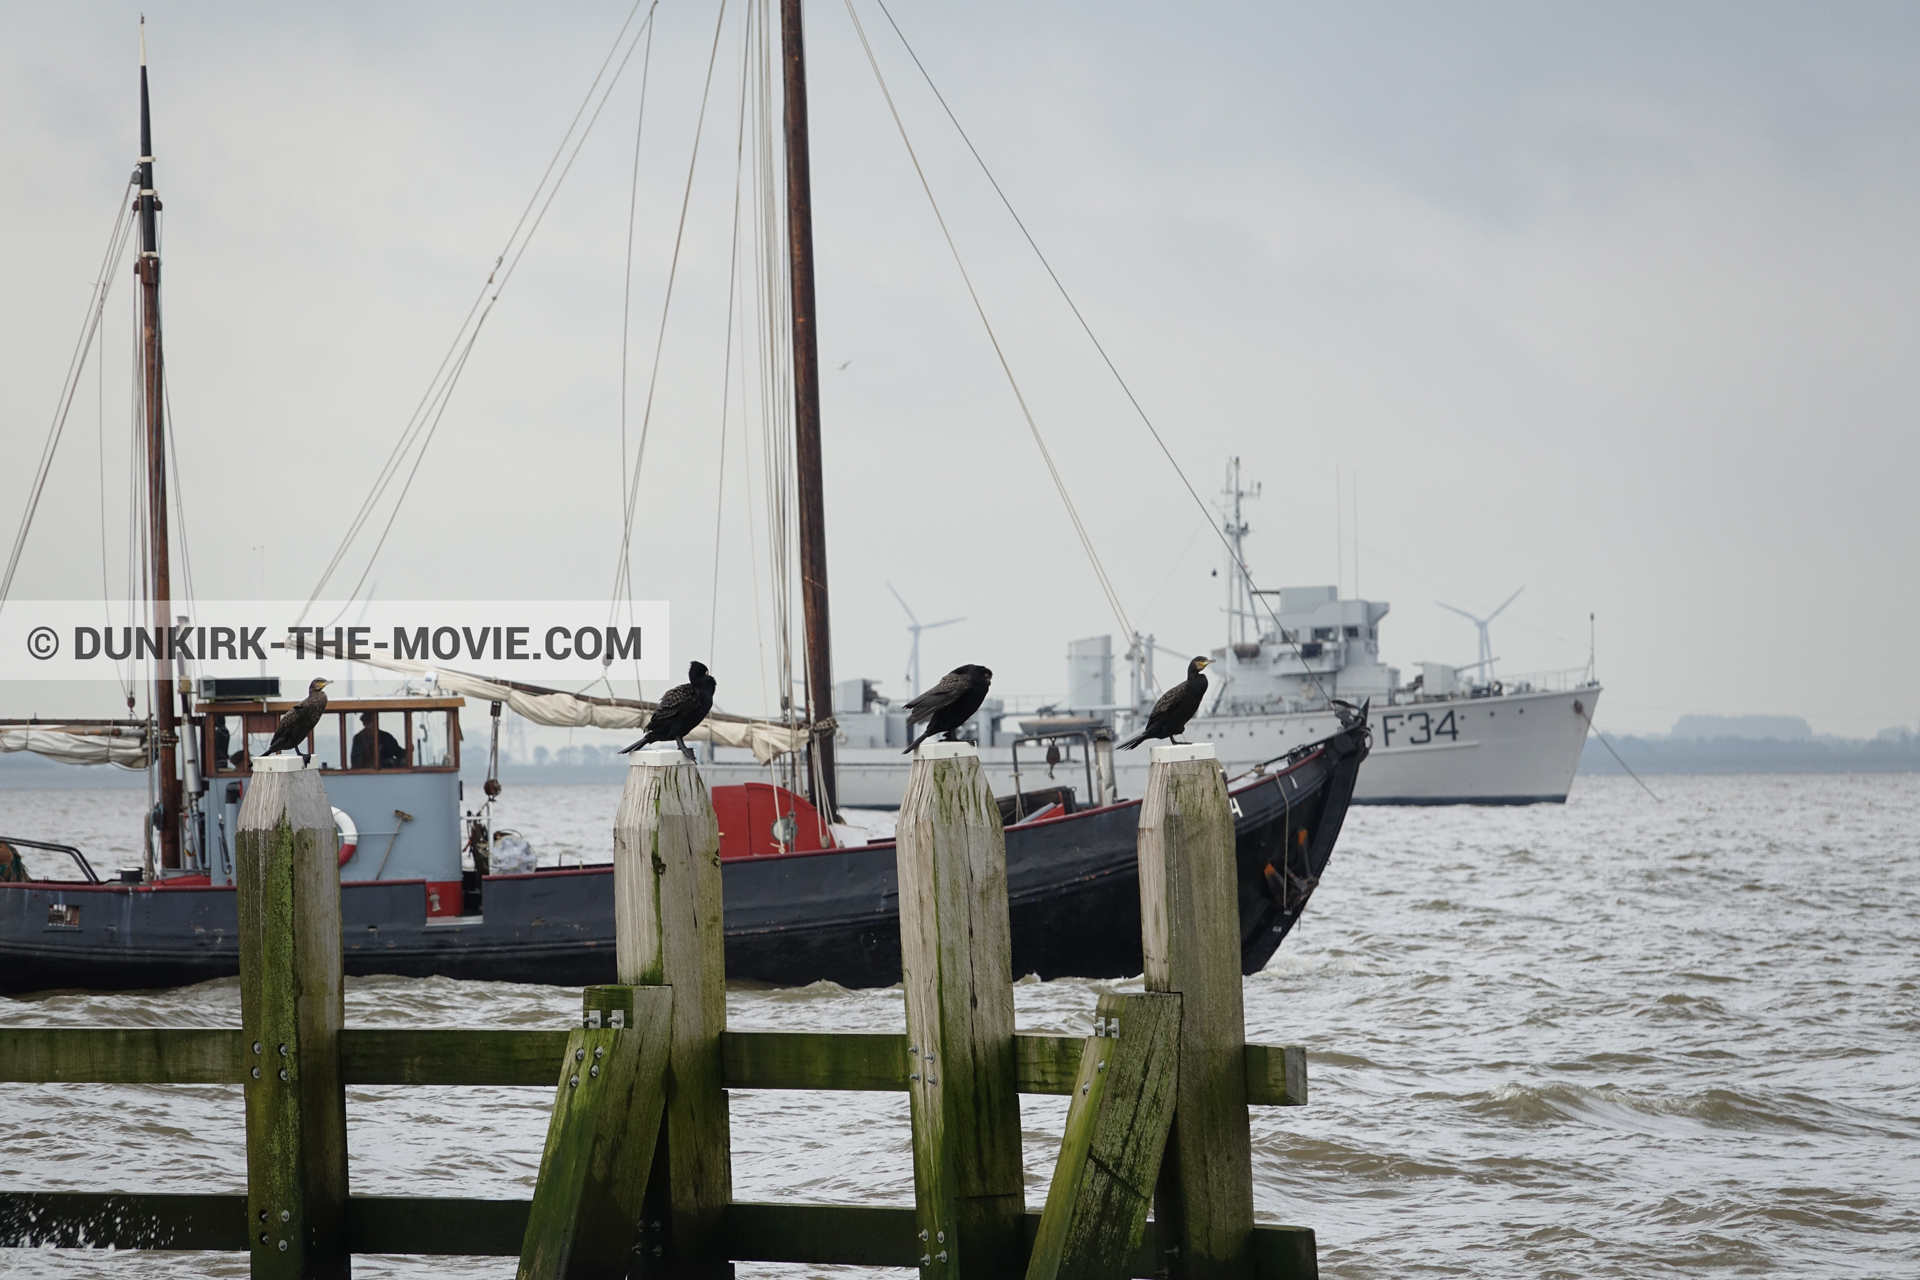 Picture with boat, F34 - Hr.Ms. Sittard,  from behind the scene of the Dunkirk movie by Nolan